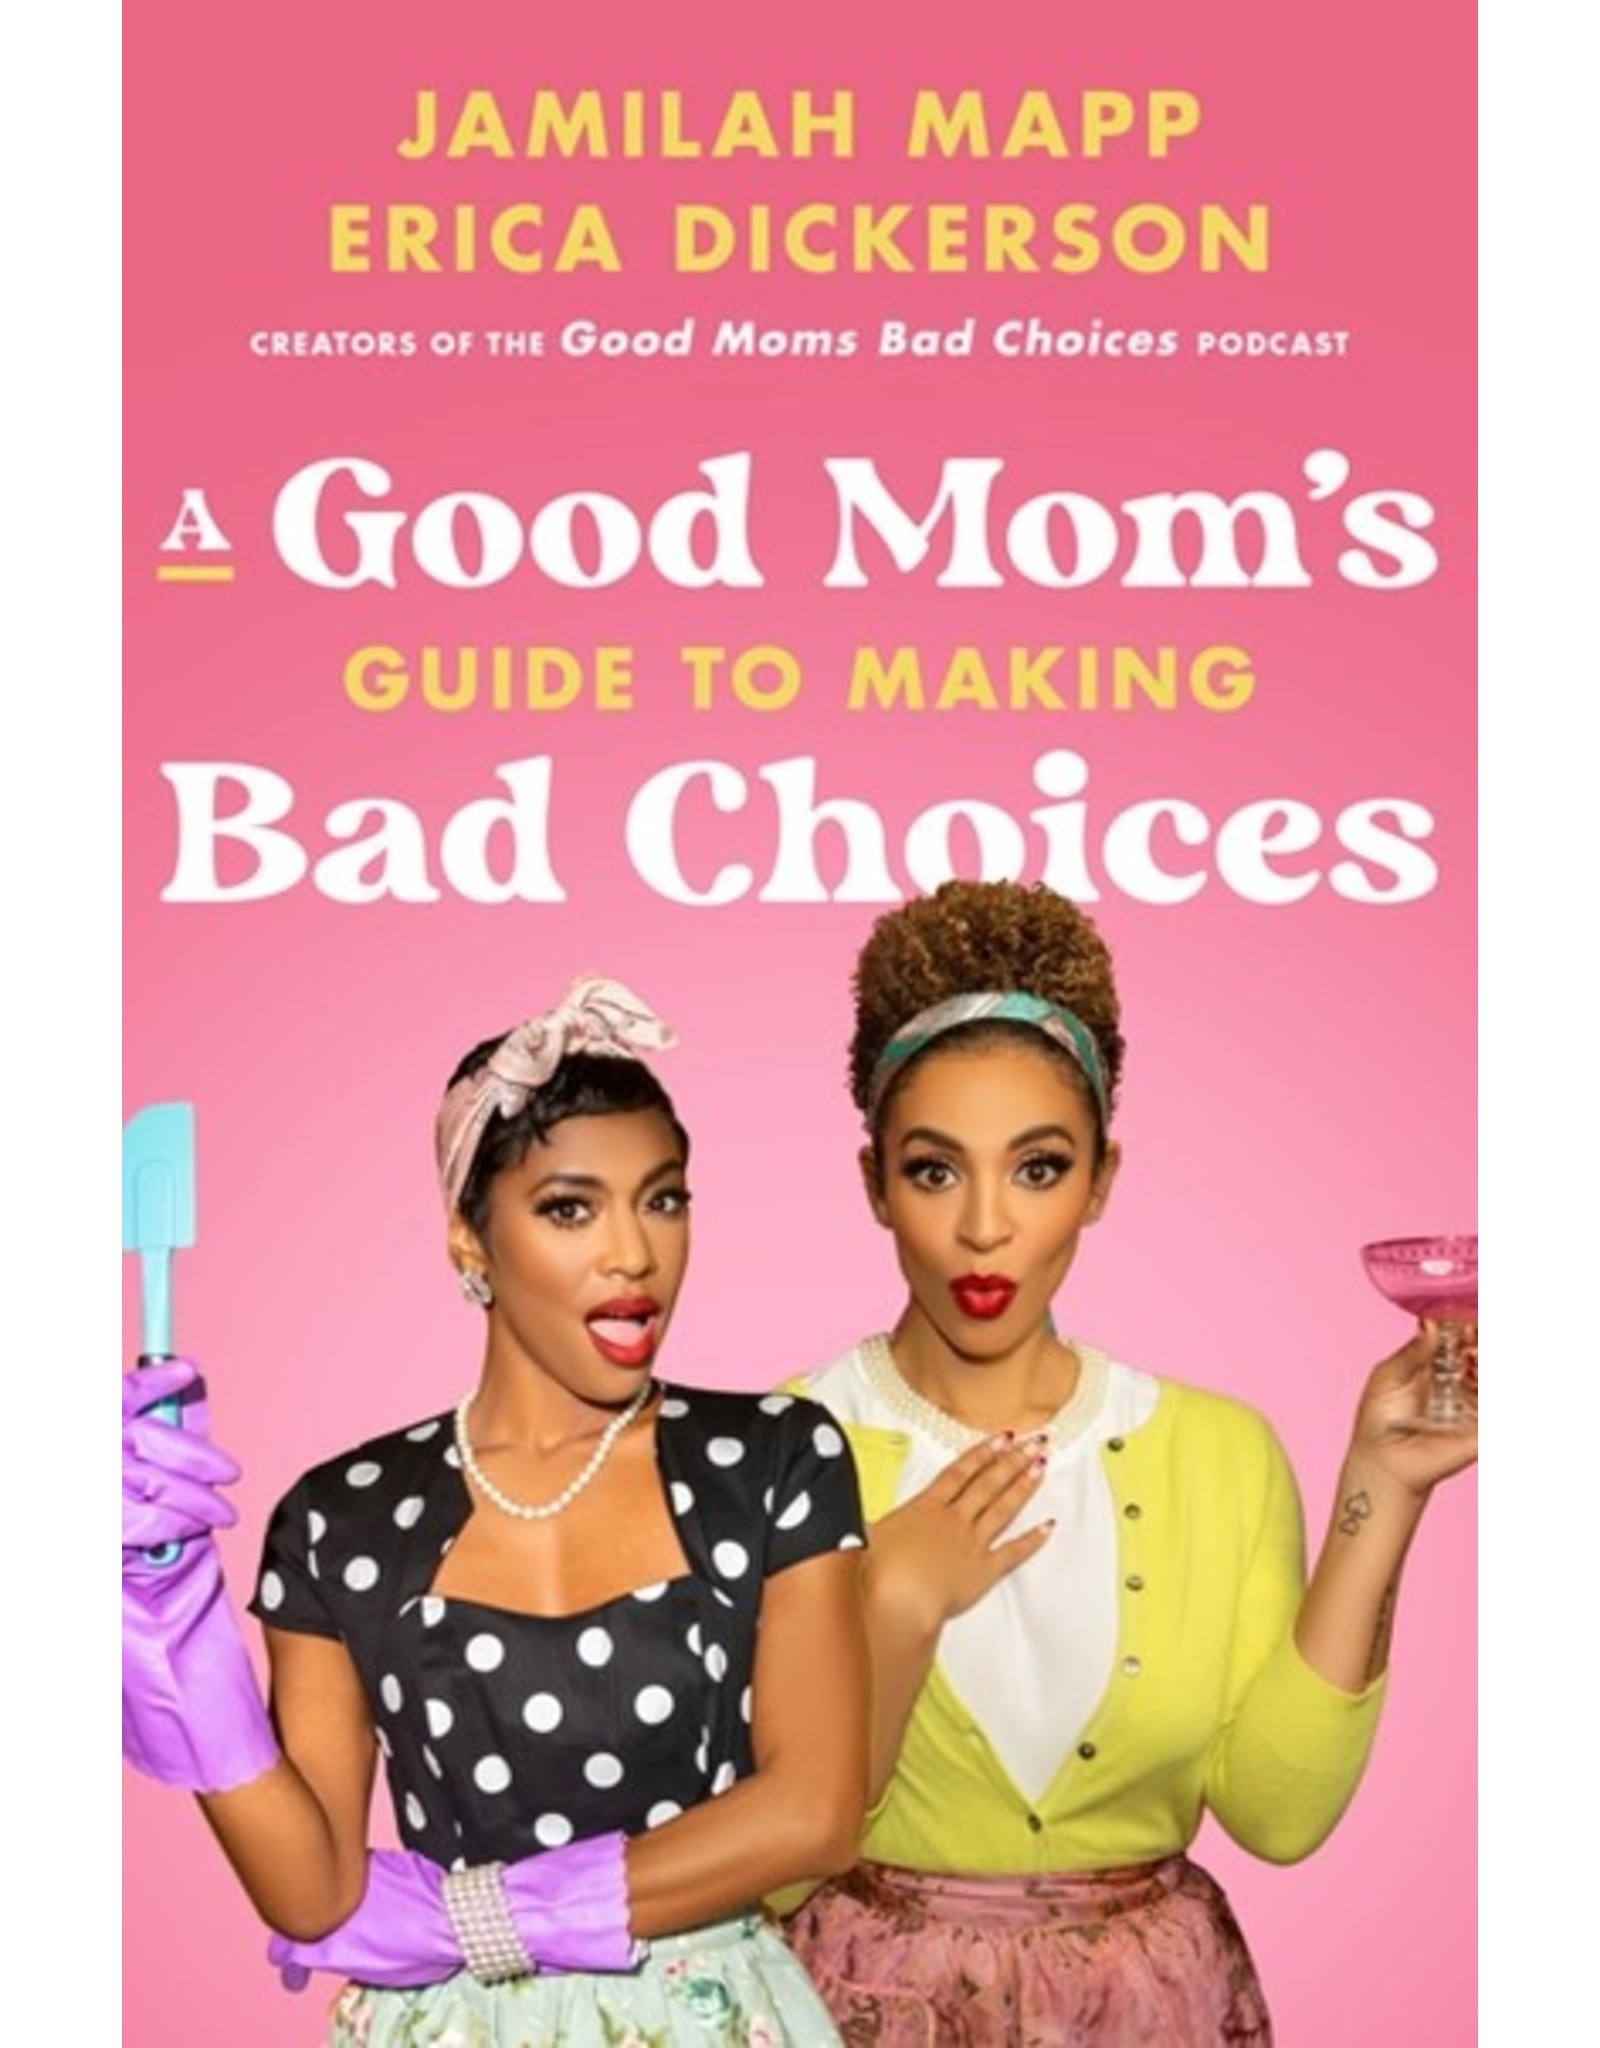 Books A Good Mom's Guide to Making Bad Choices by Jamilah Mapp & Erica Dickerson